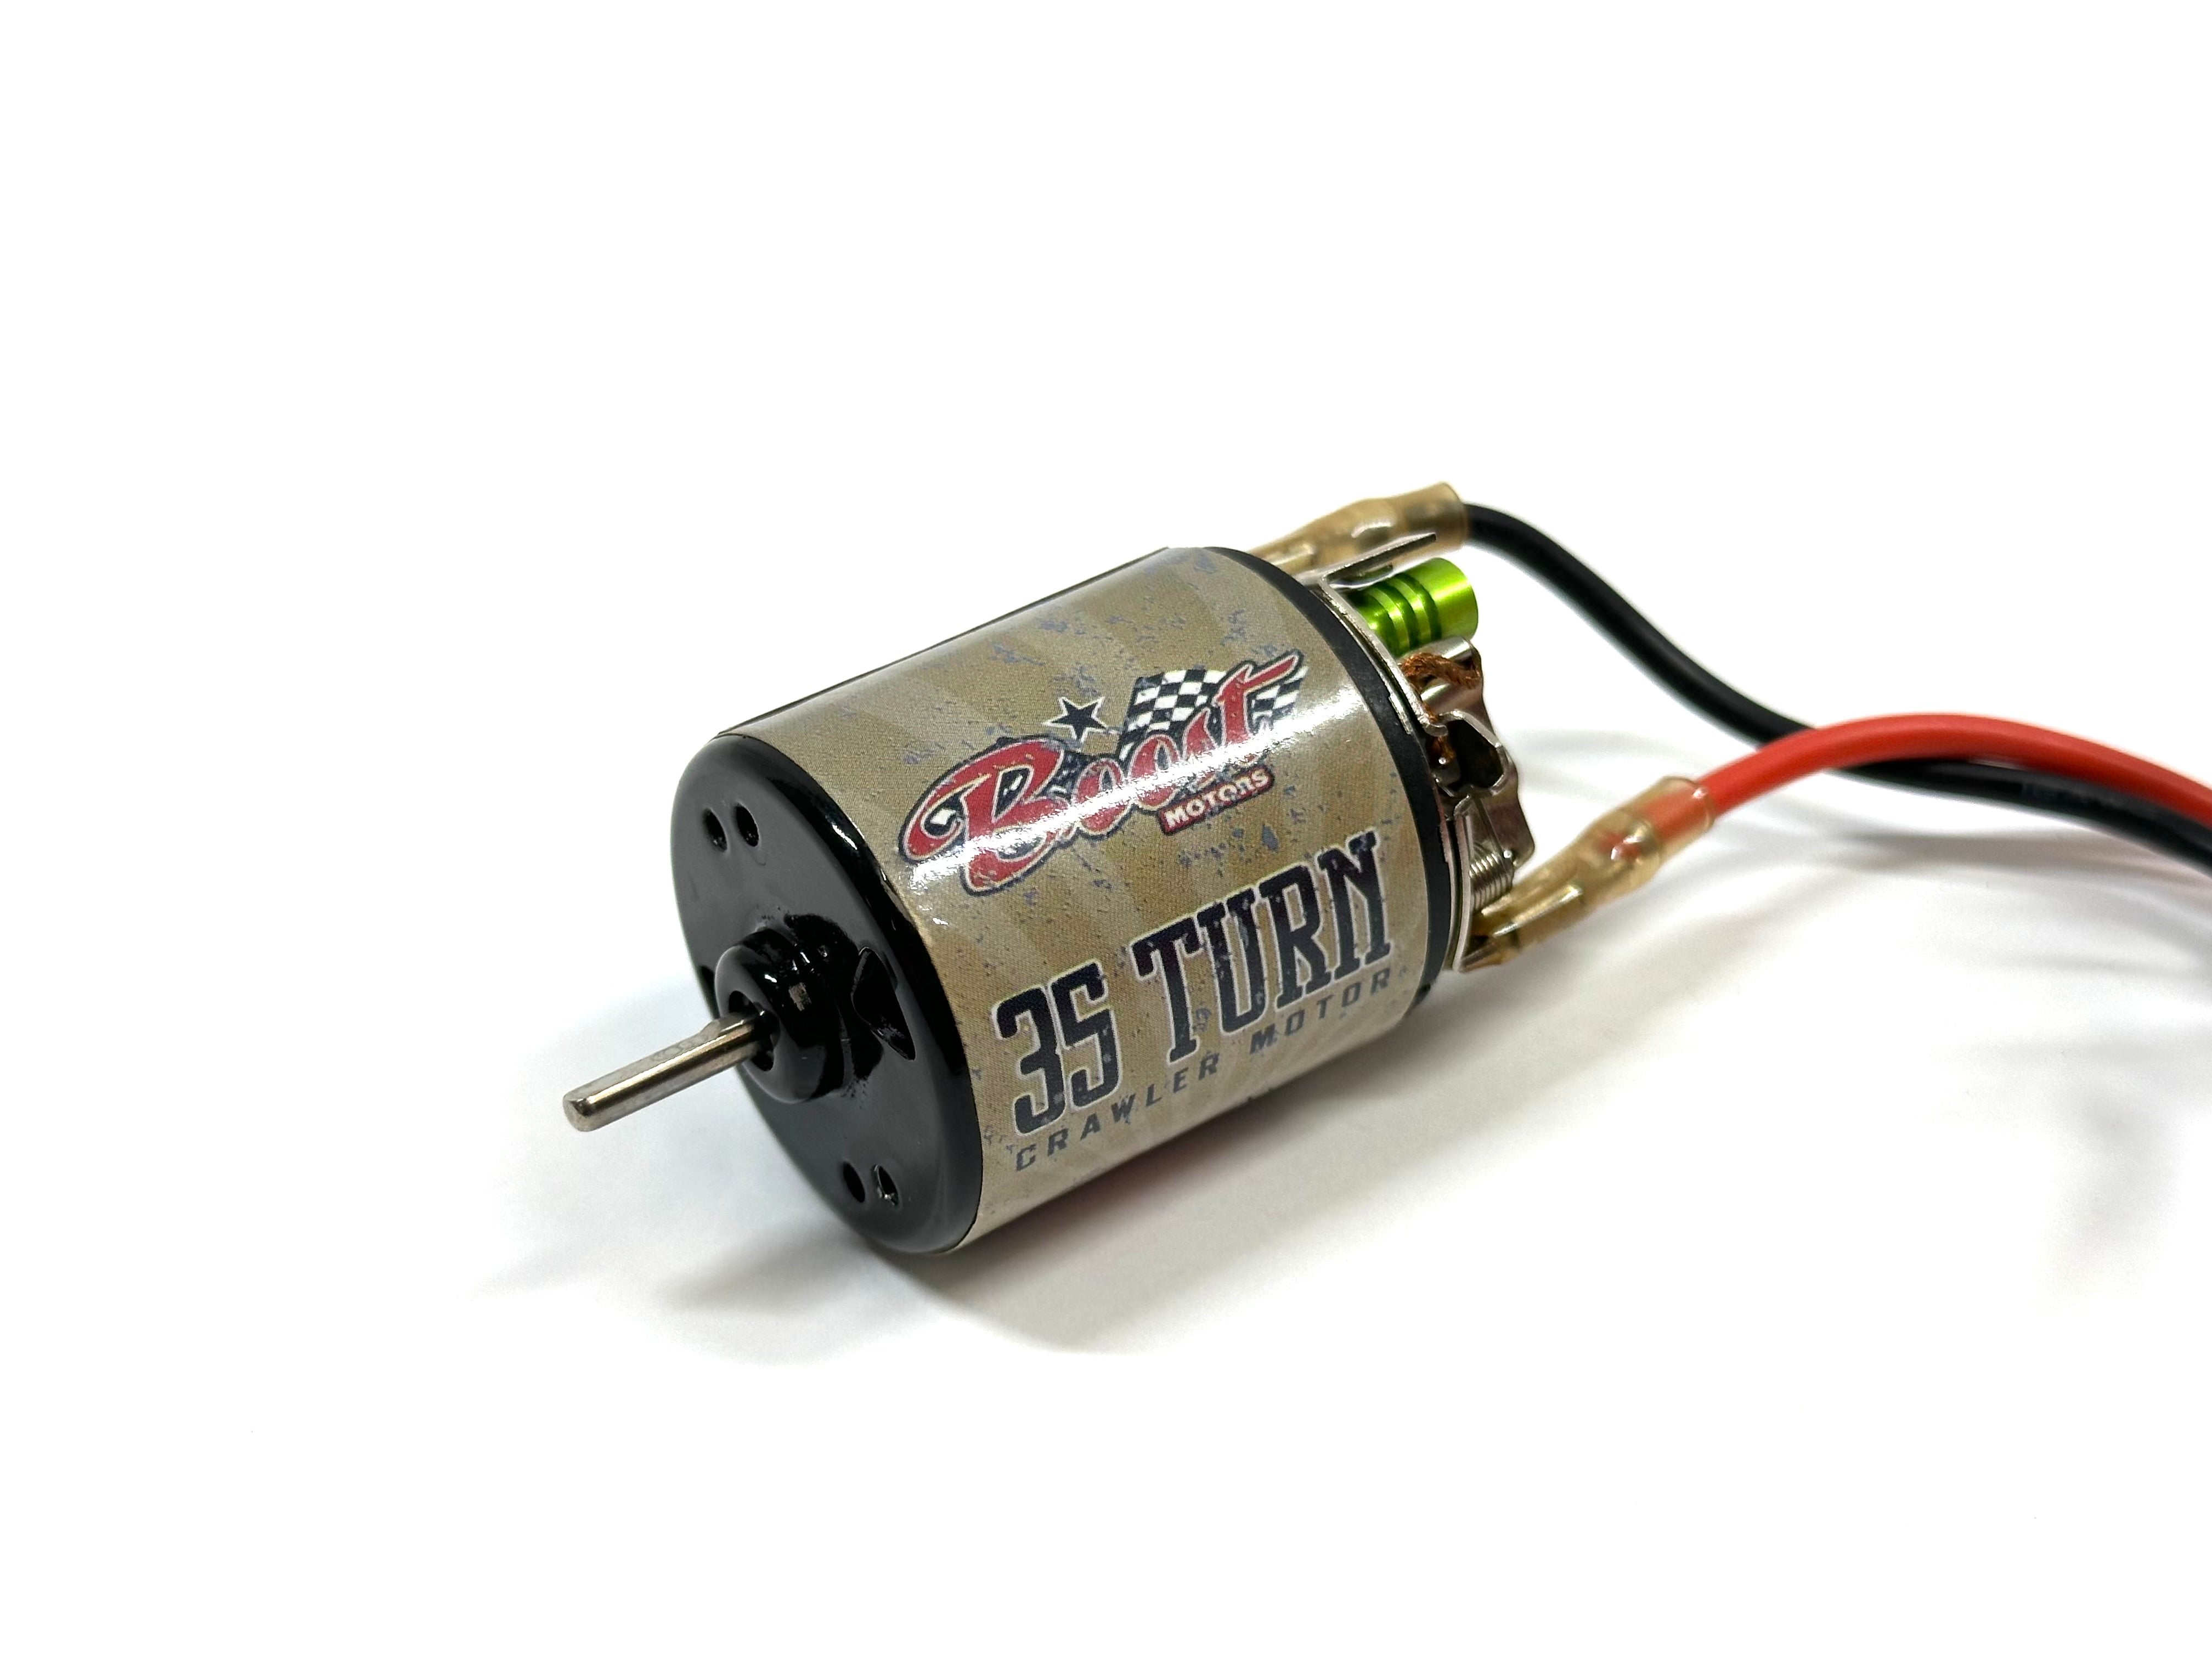 Traxxas XL5HV Brushed ESC & RC4WD 35T Brushed Rebuildable Motor